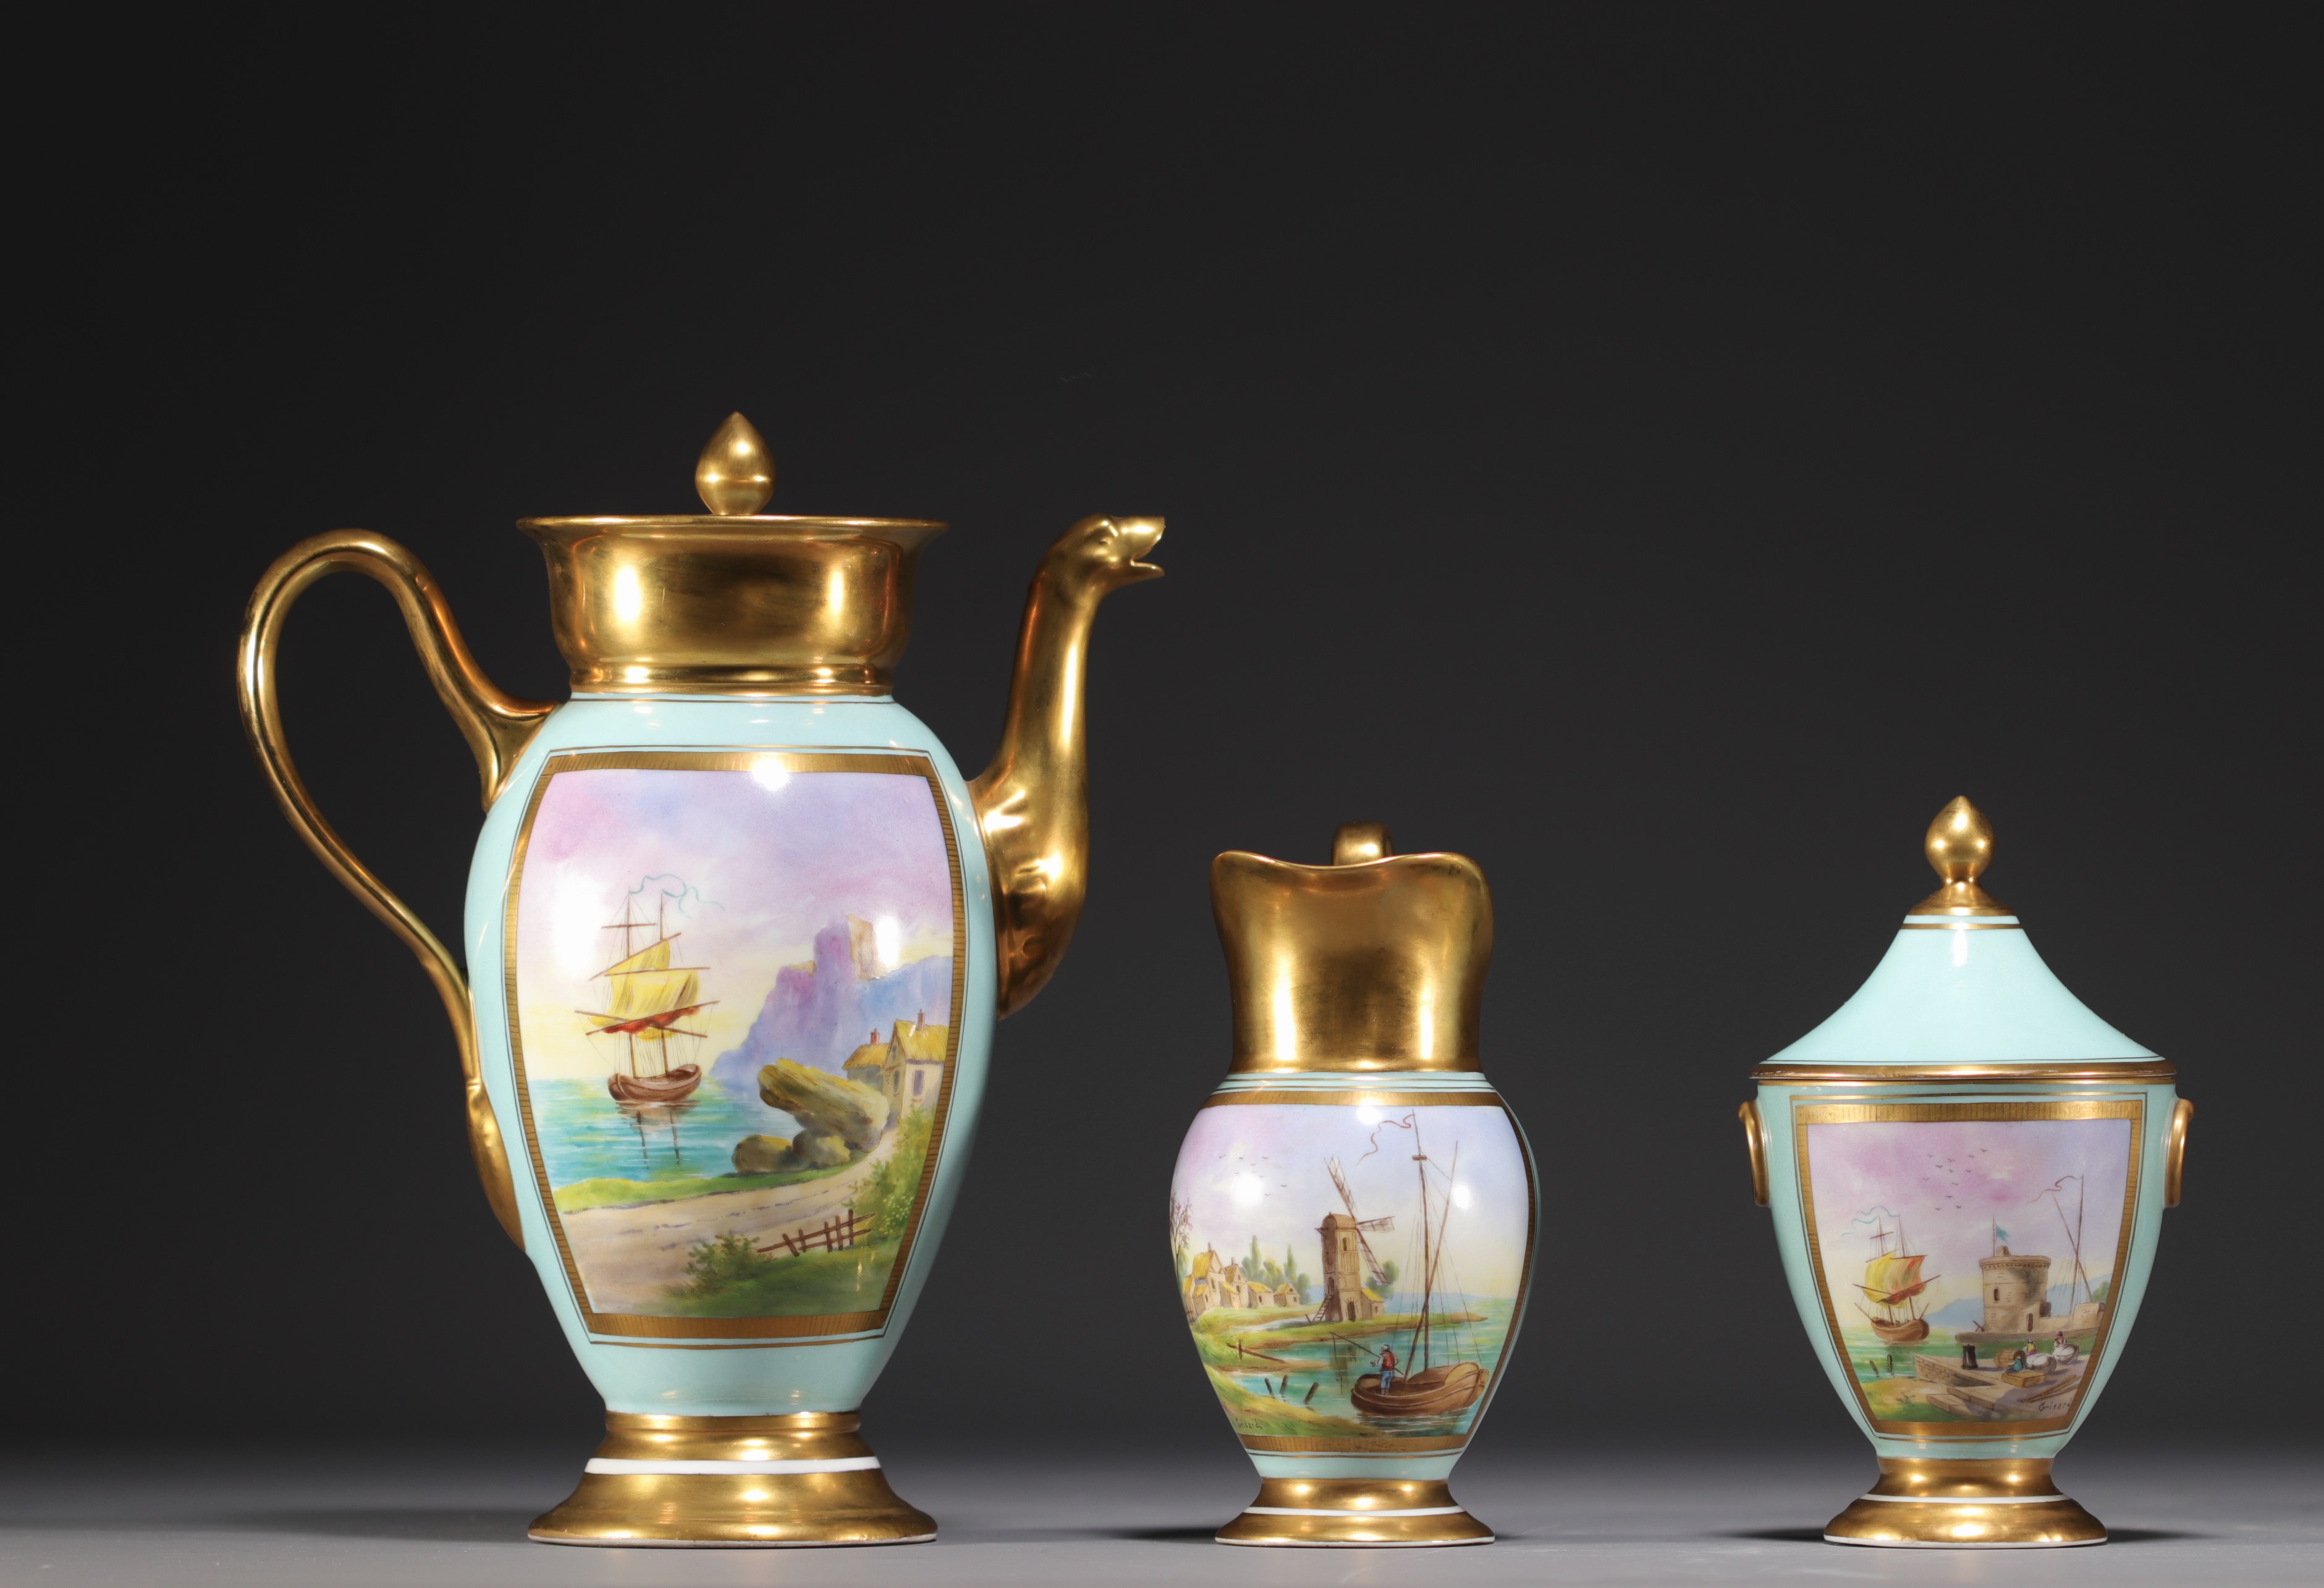 Sevres - A 19th century porcelain coffee service decorated with a marine scene. - Image 2 of 5